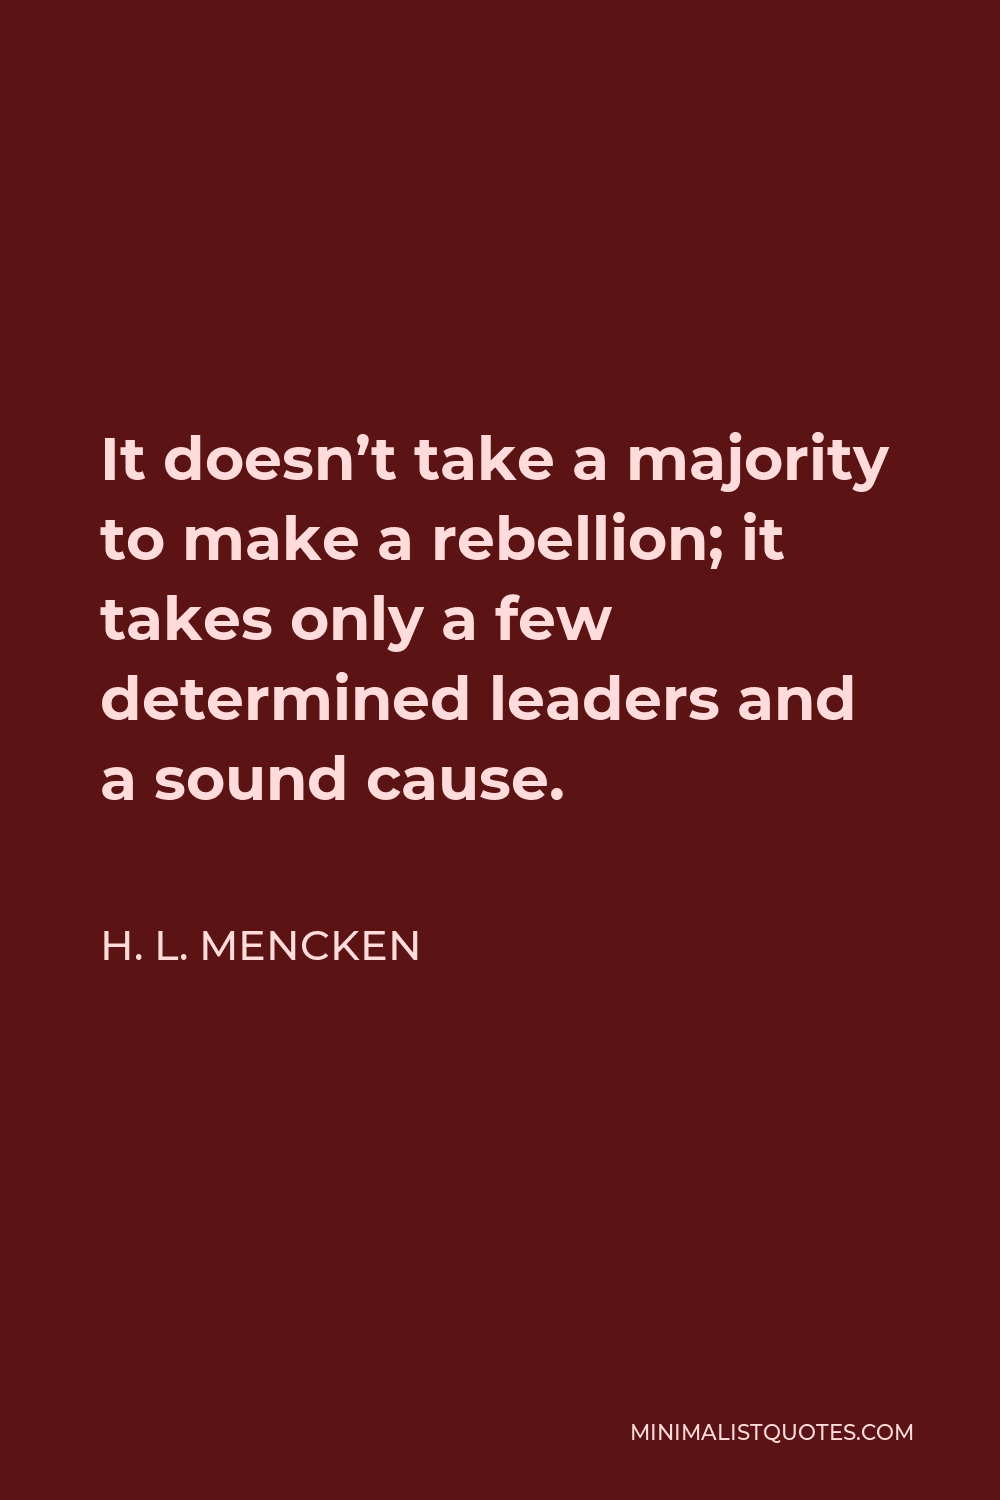 H. L. Mencken Quote - It doesn’t take a majority to make a rebellion; it takes only a few determined leaders and a sound cause.